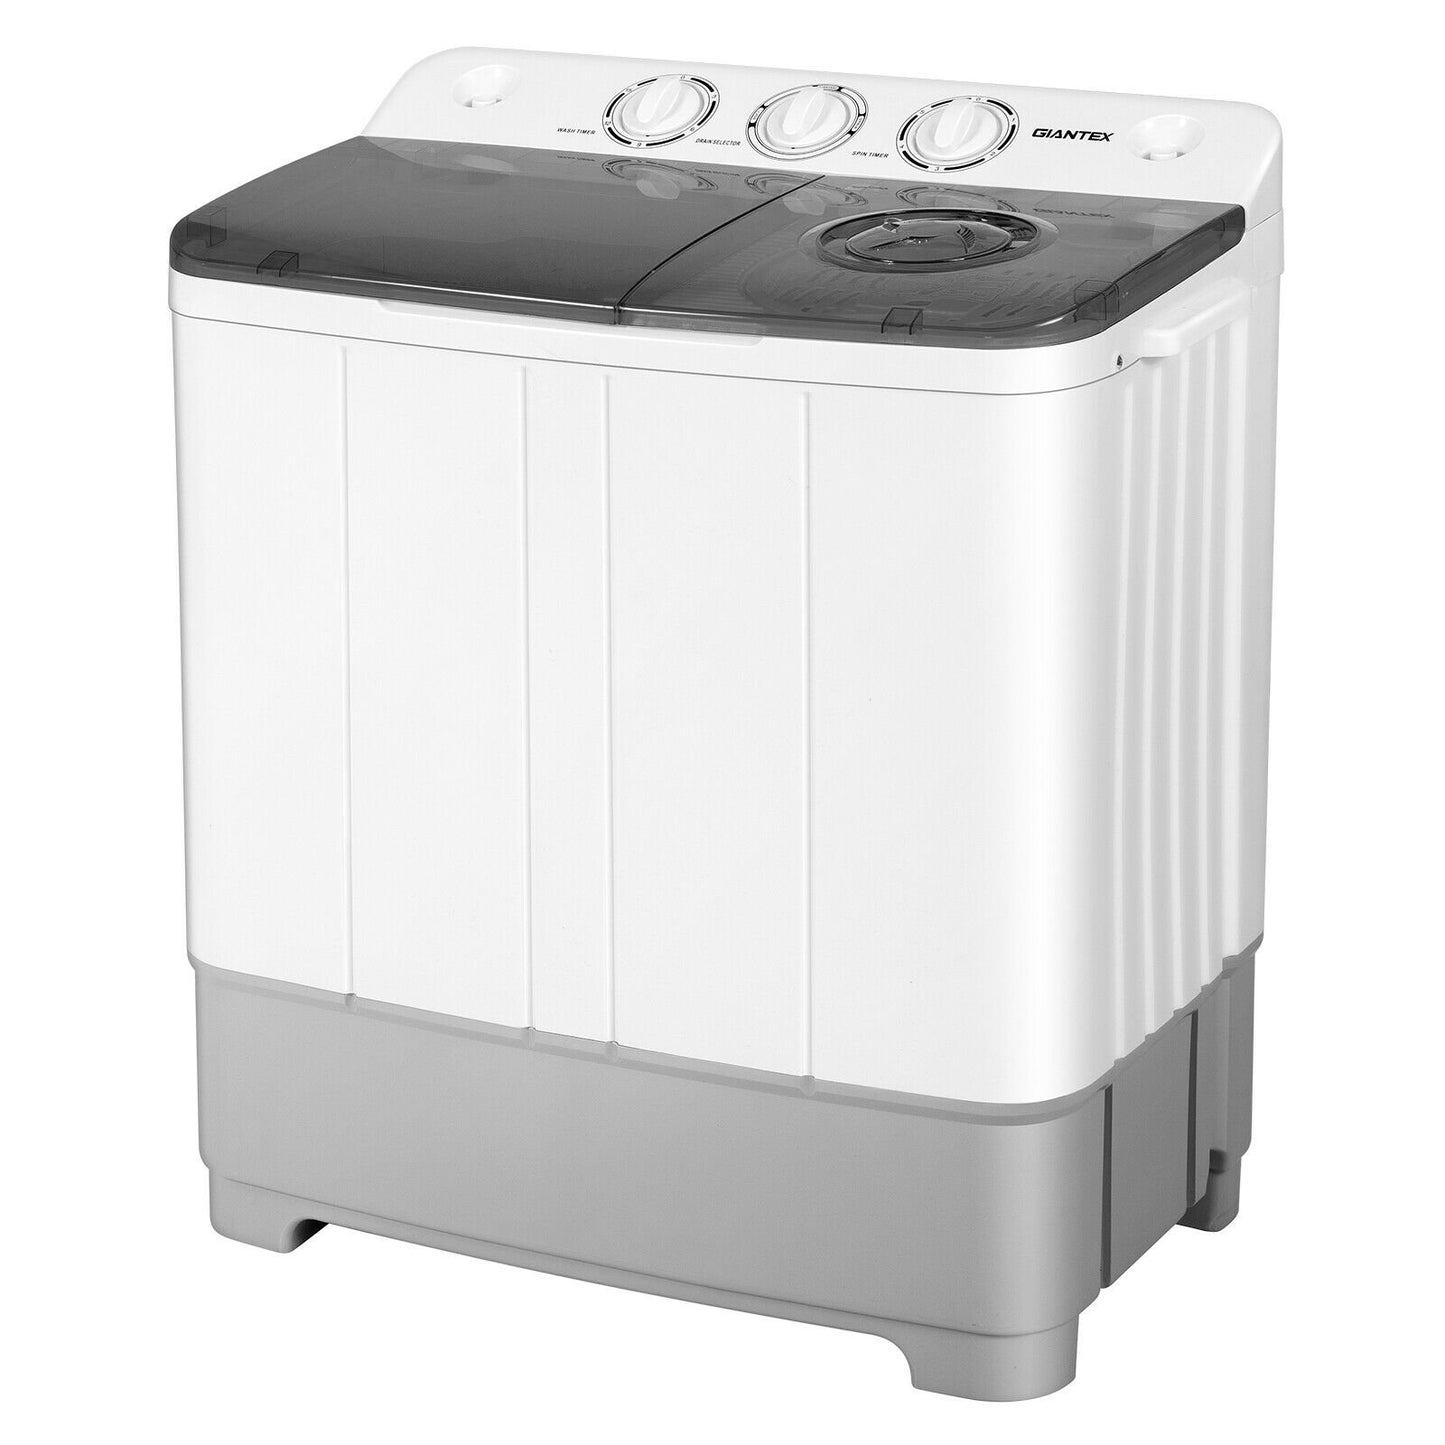 2-in-1 Portable 22lbs Capacity Washing Machine with Timer Control, Gray